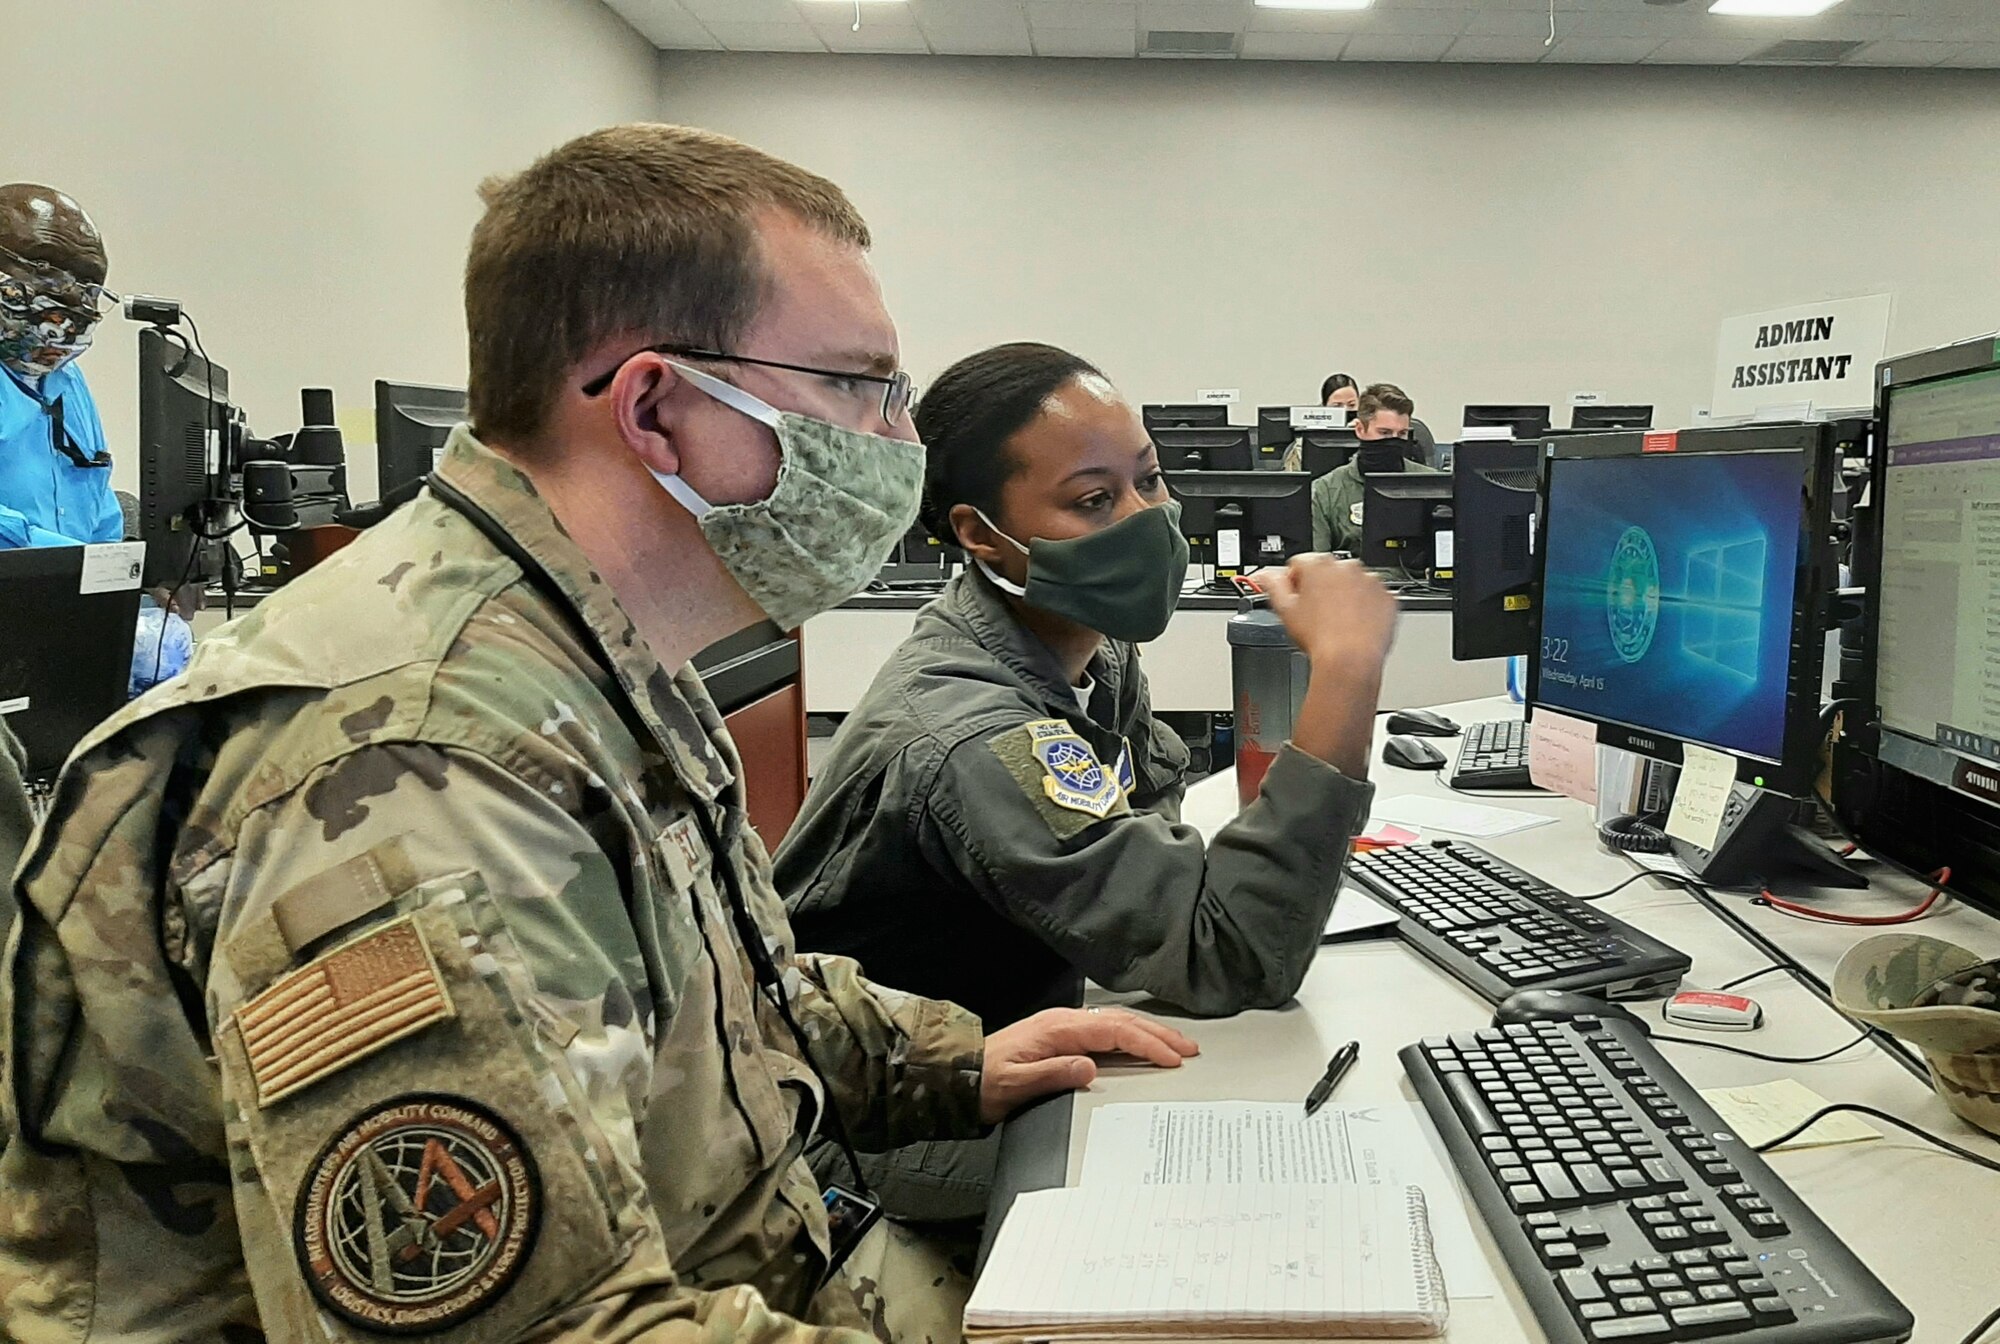 Master Sgt. Latresia Push (right), Air Mobility Command Commander’s Battle Staff administrative representative, trains  Master Sgt. Chris West for CBS duty at Scott Air Force Base, Illinois, April 15, 2020. Since its activation March 4, 2020, the AMC CBS has served as a single, 24/7 cell of experts to ensure uninterrupted rapid global mobility amidst the COVID-19 pandemic, producing more than 40 Battle Staff Directives to guide Airmen on everything from aircraft decontamination to patient movement to timely reporting of COVID-19 cases at AMC installations. (U.S. Air Force photo by Col. Damien Pickart)